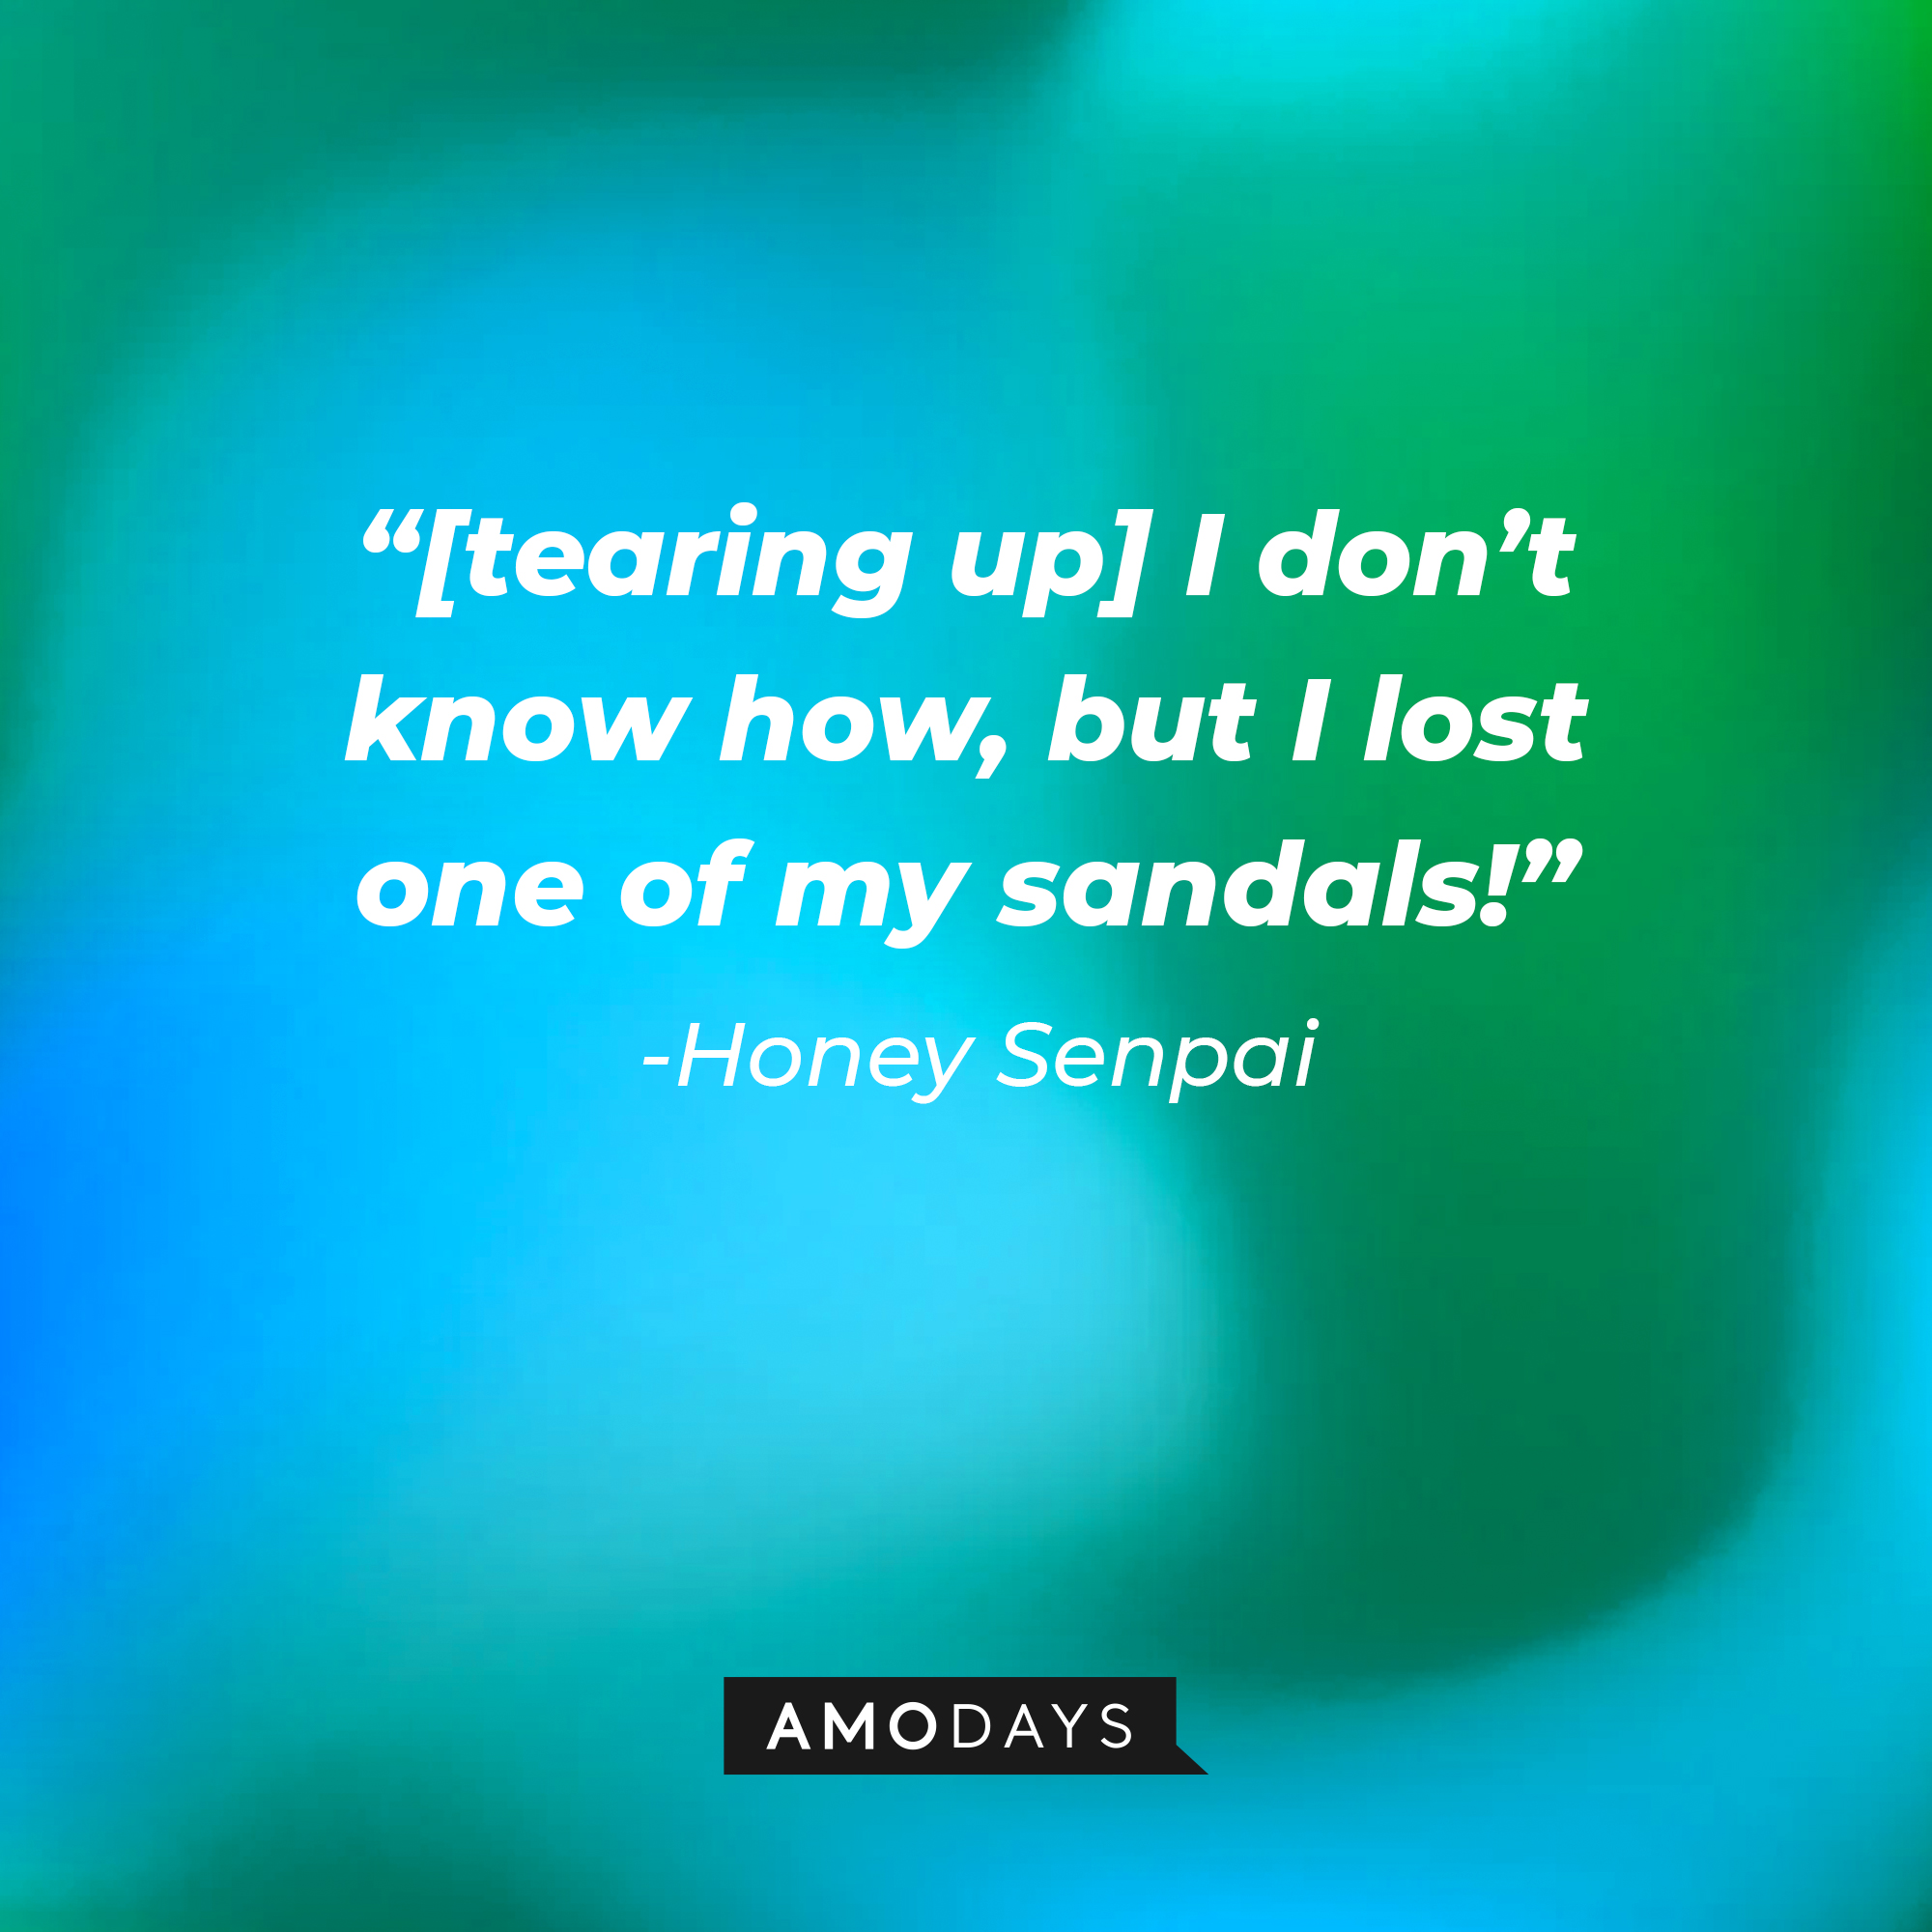 Honey Senpai’s quote: "[tearing up] I don’t know how, but I lost one of my sandals!” | Source: AmoDays